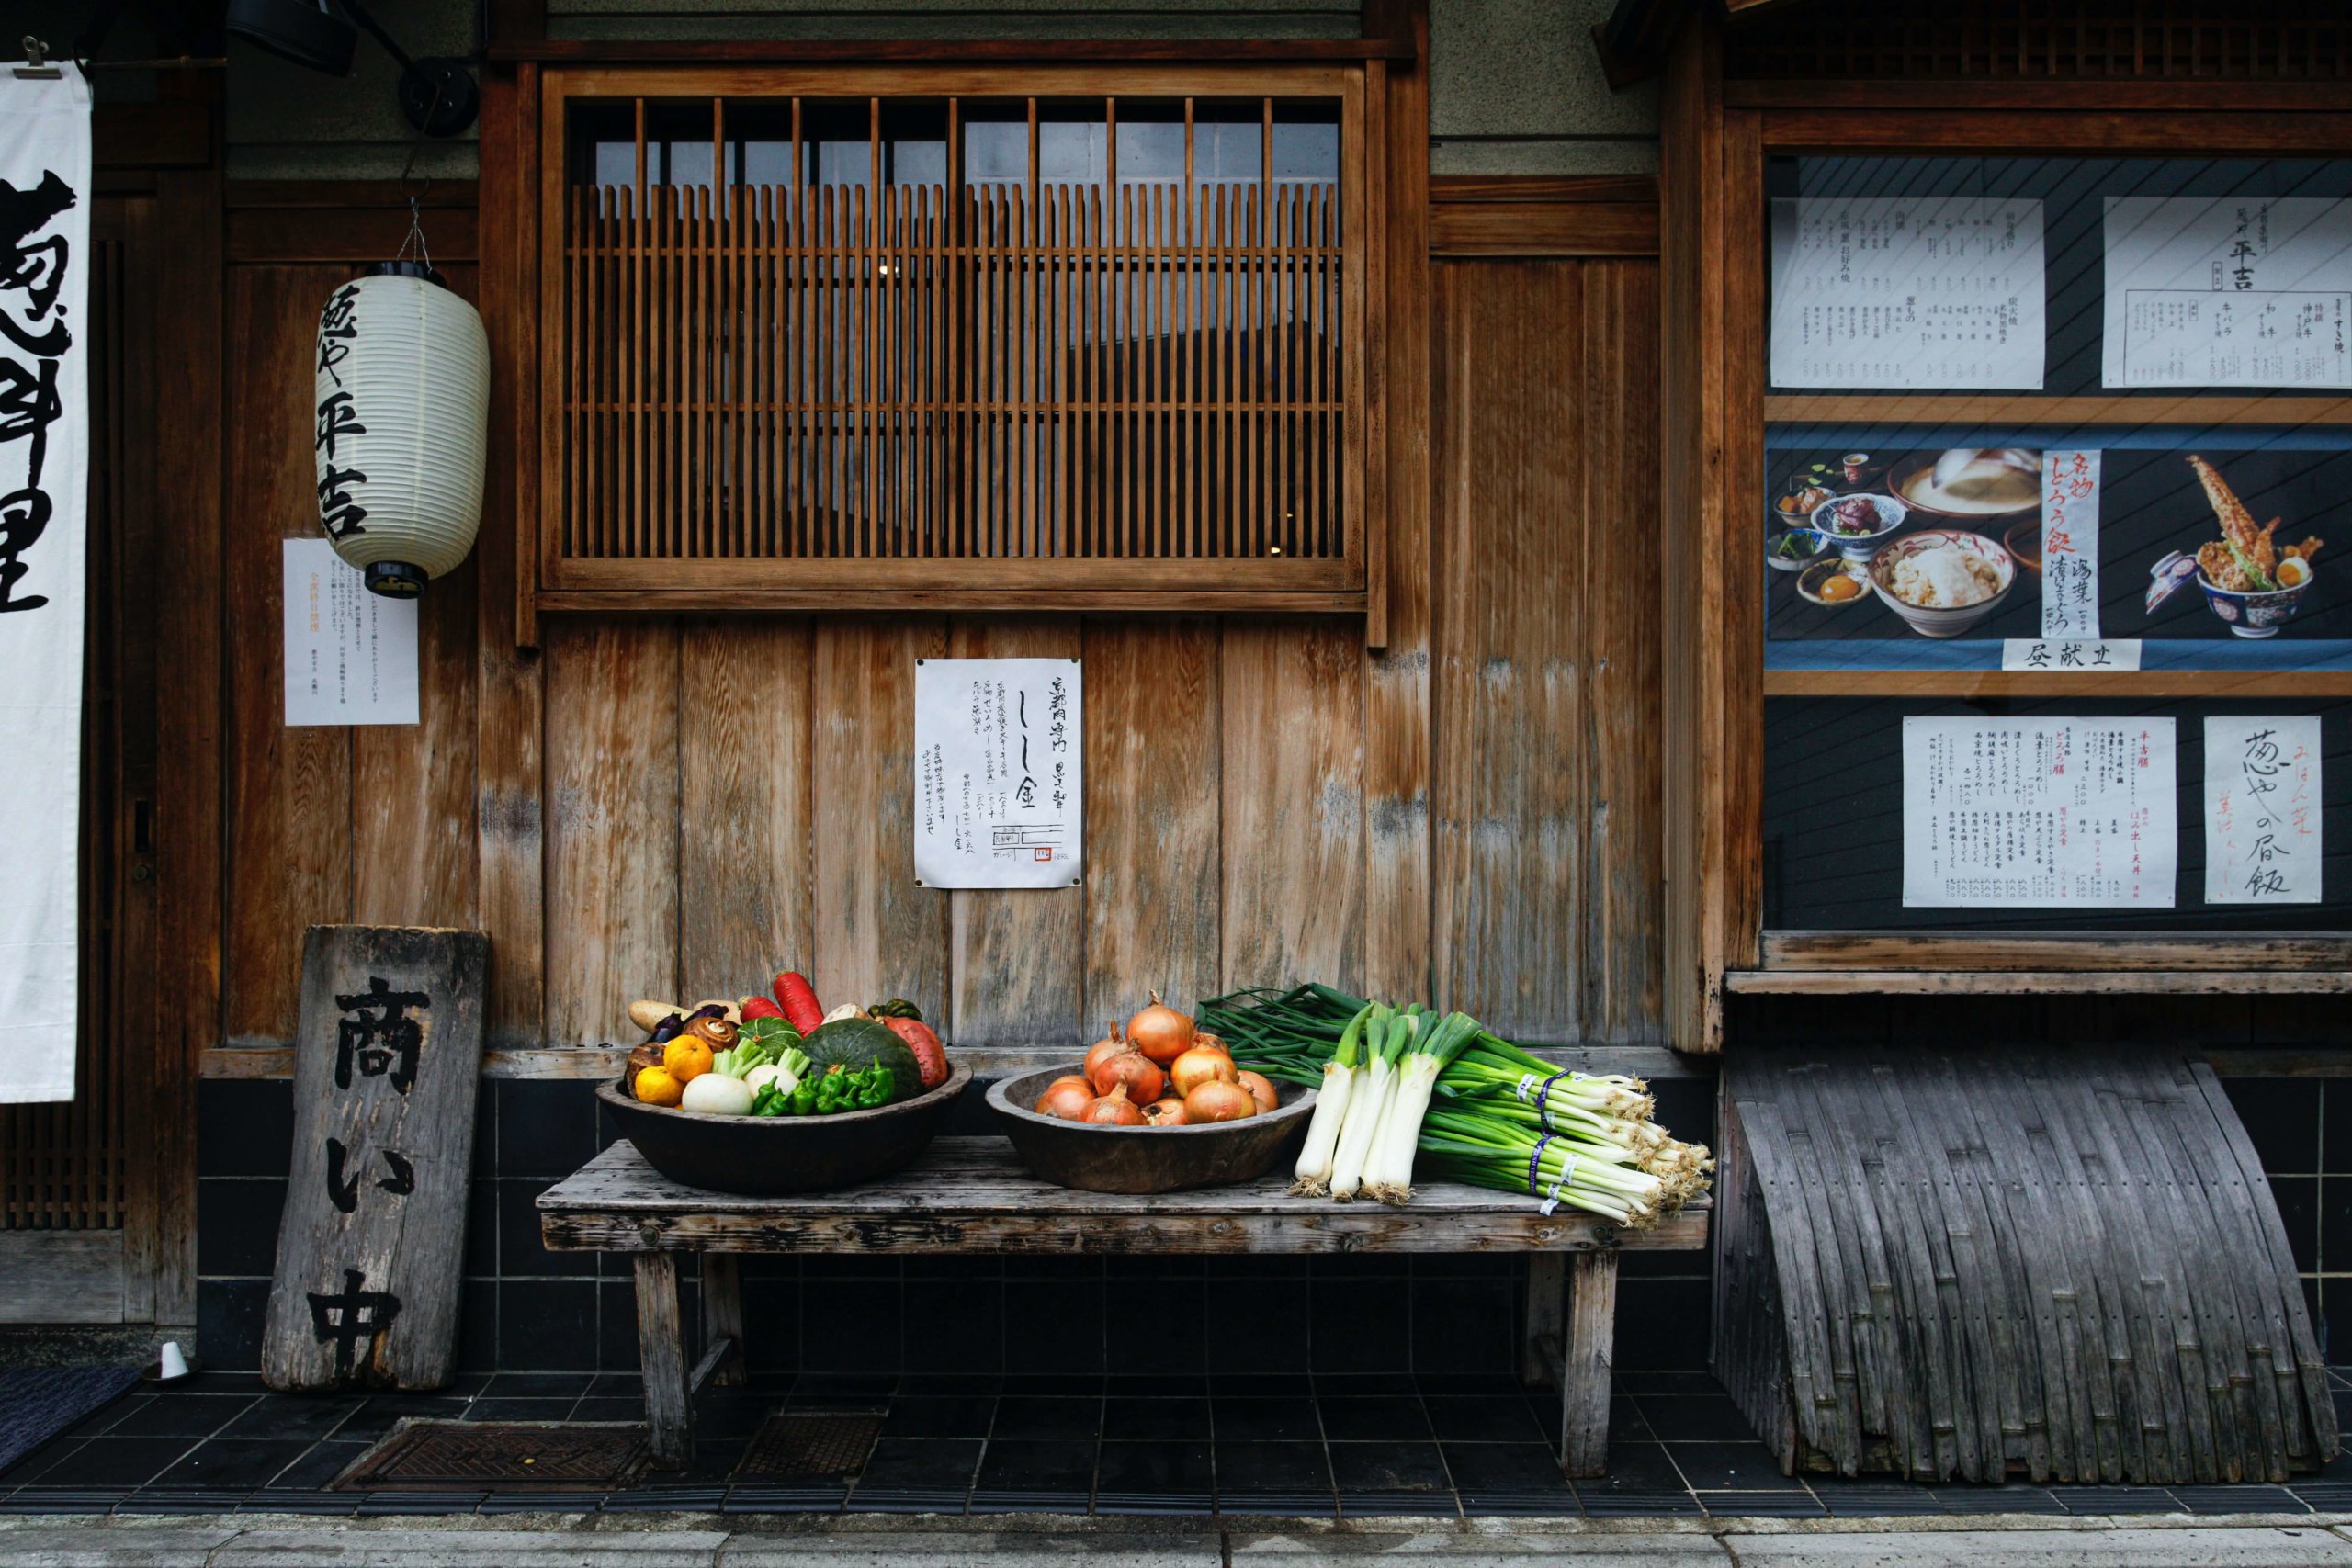 vegetables outside a traditional wooden restaurant in kyoto, japan